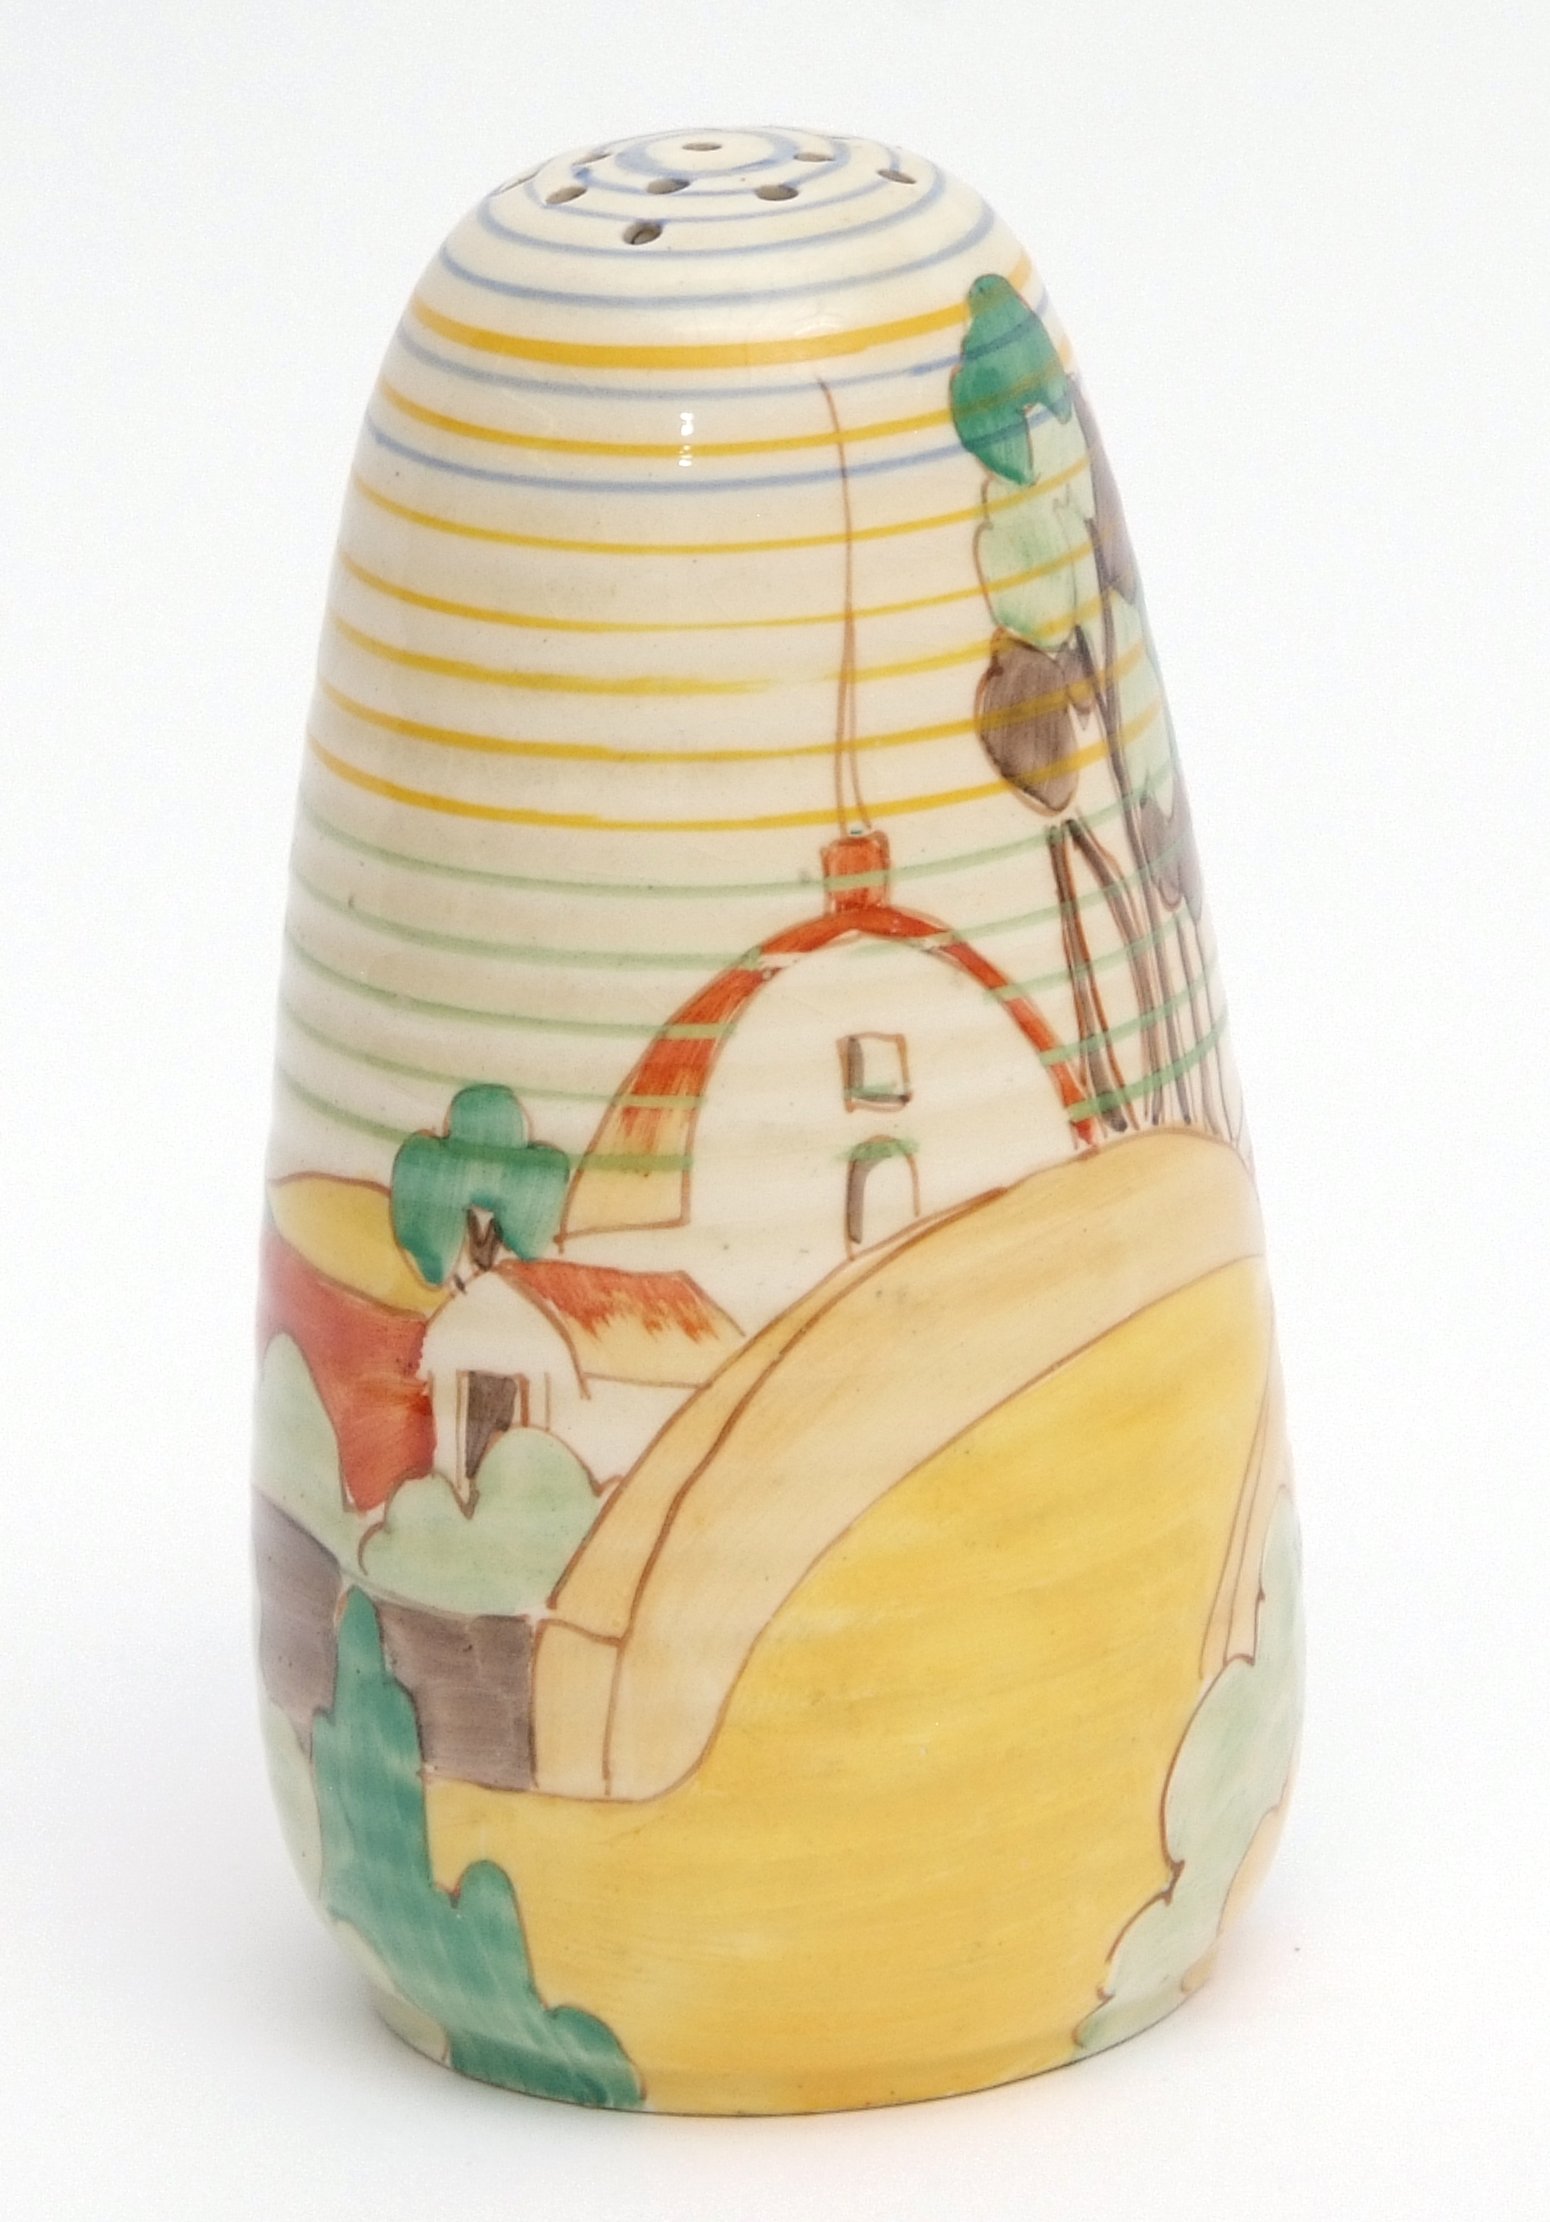 Clarice Cliff sugar sifter in the Brookfields pattern, with a cottage by a bridge, with thin lines